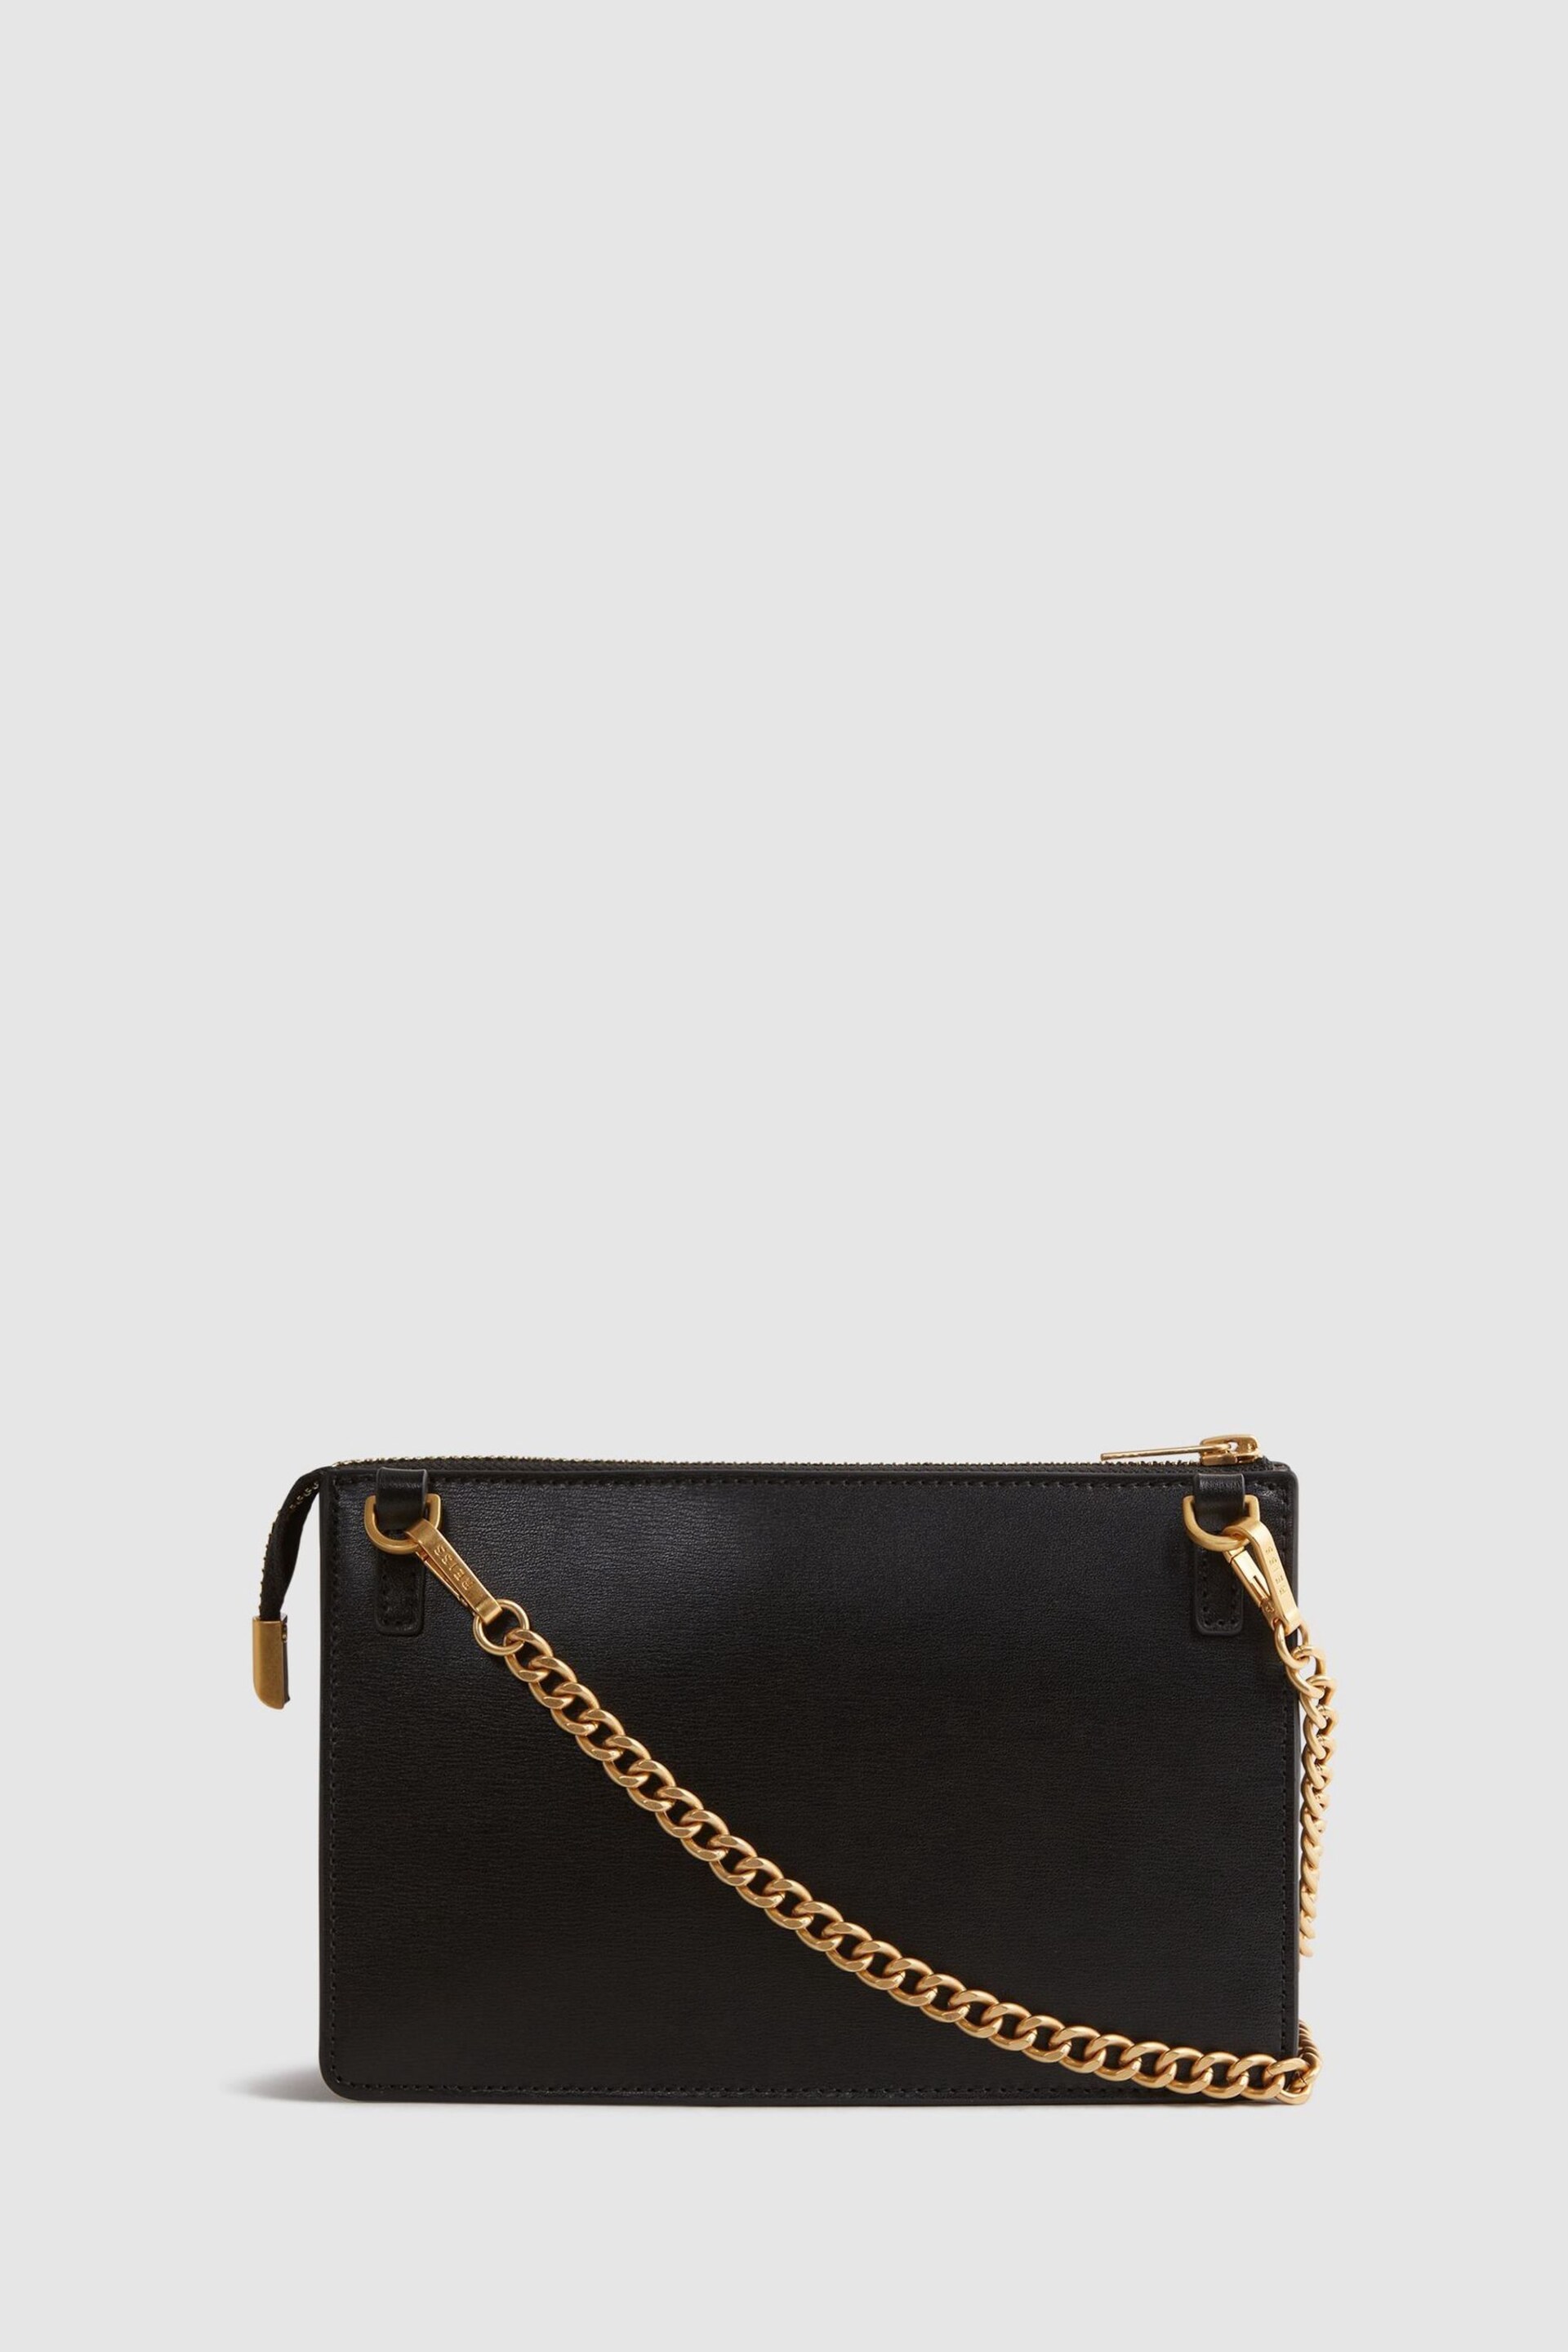 Reiss Black Picton Leather Chain Crossbody Bag - Image 4 of 5